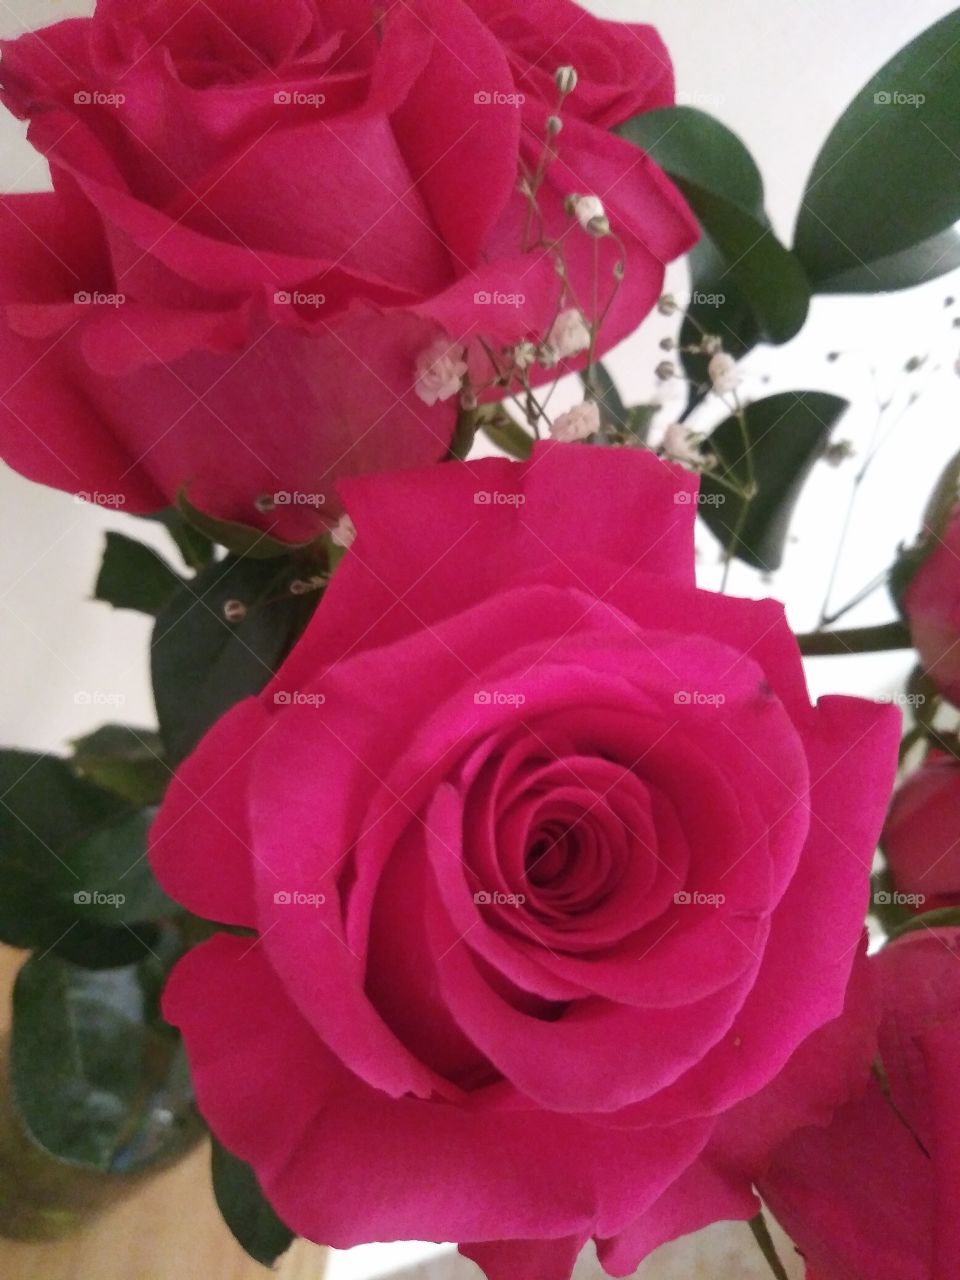 Roses are Pink..